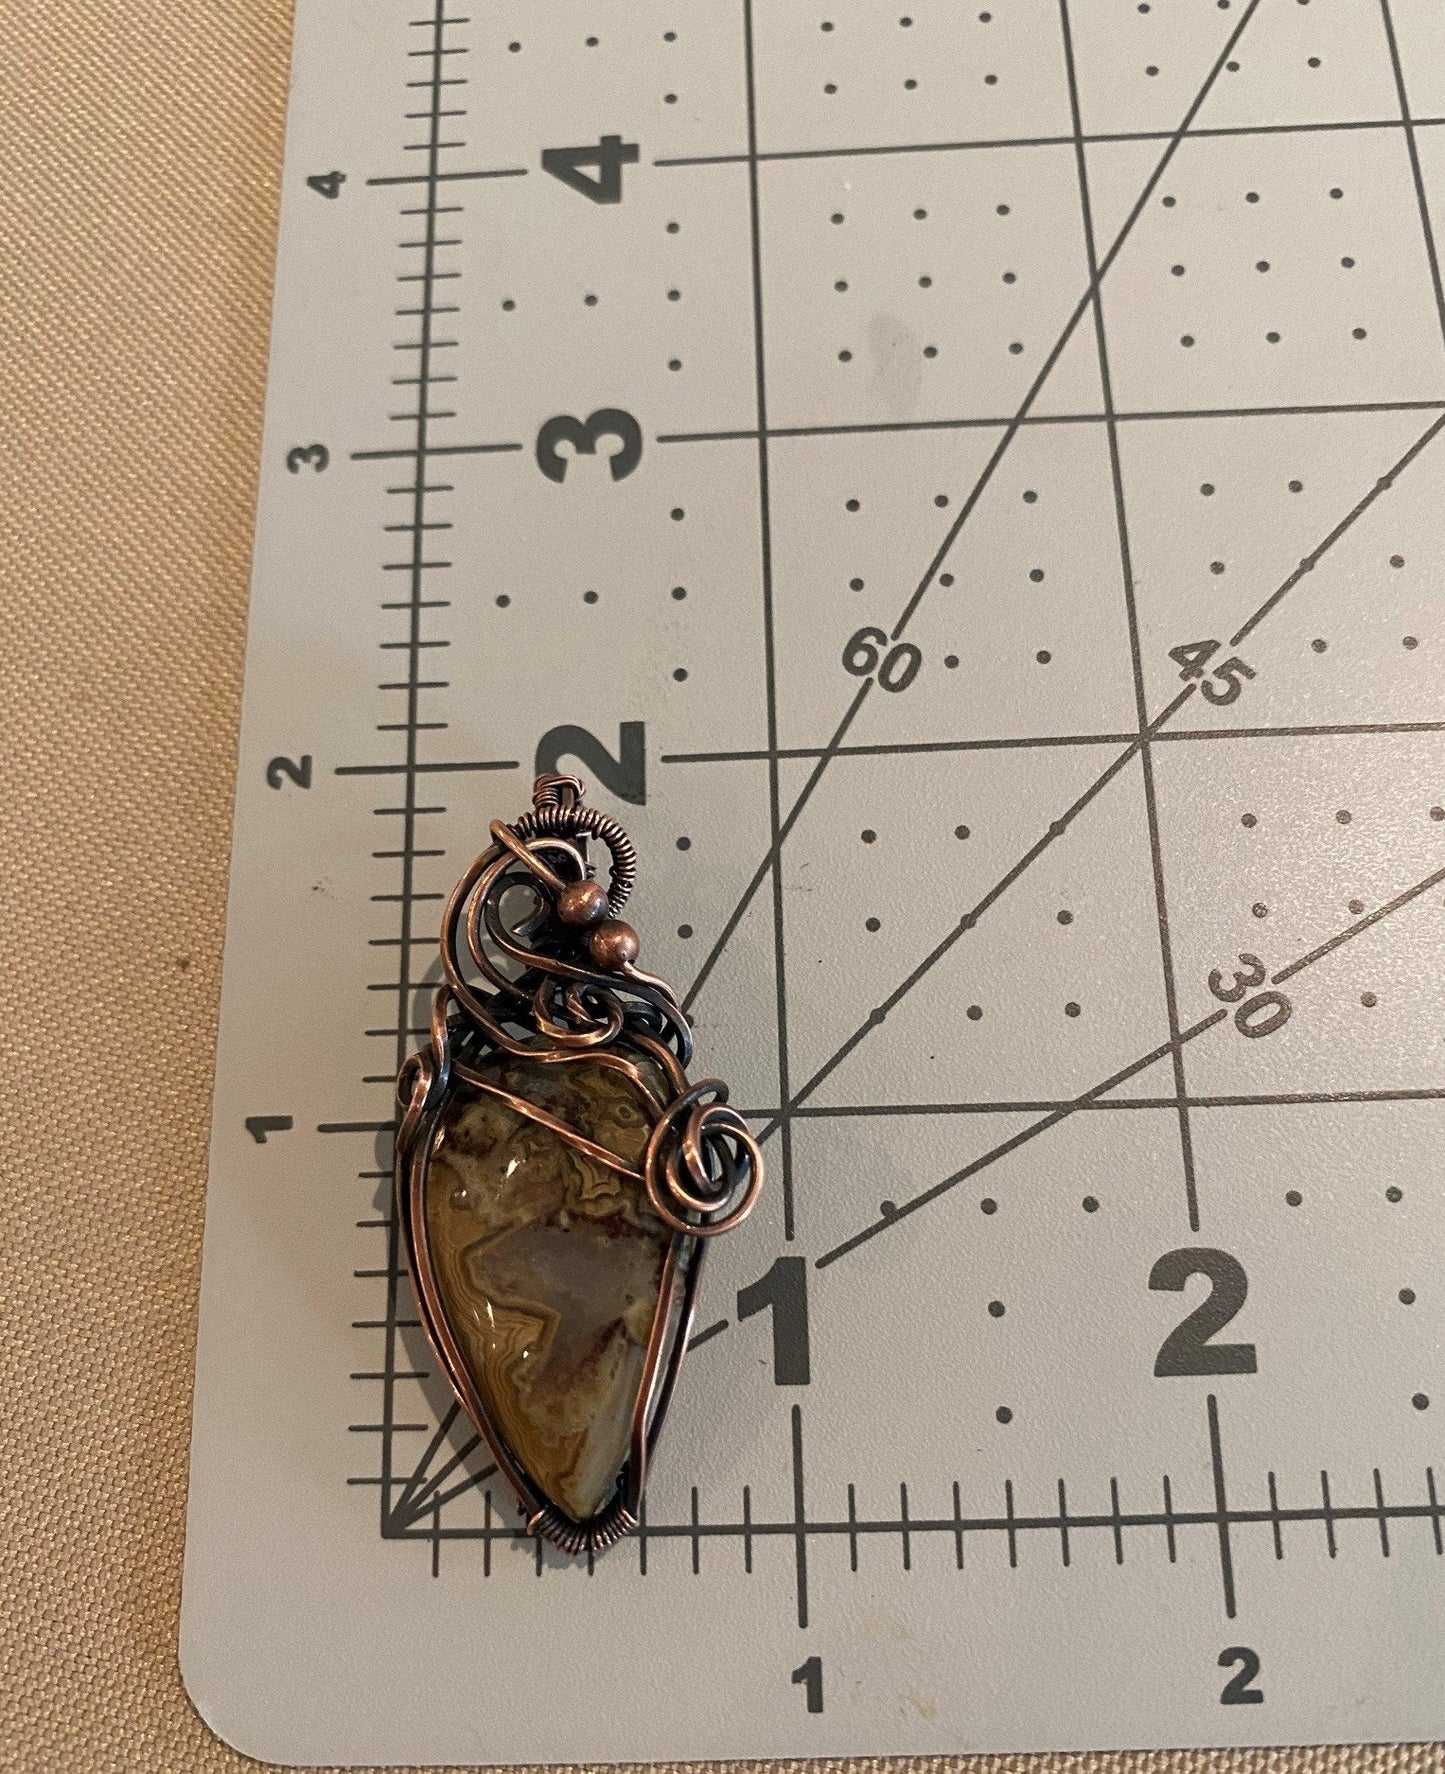 Earth Toned Crazy Lace Teardrop Wire Wrapped Pendant